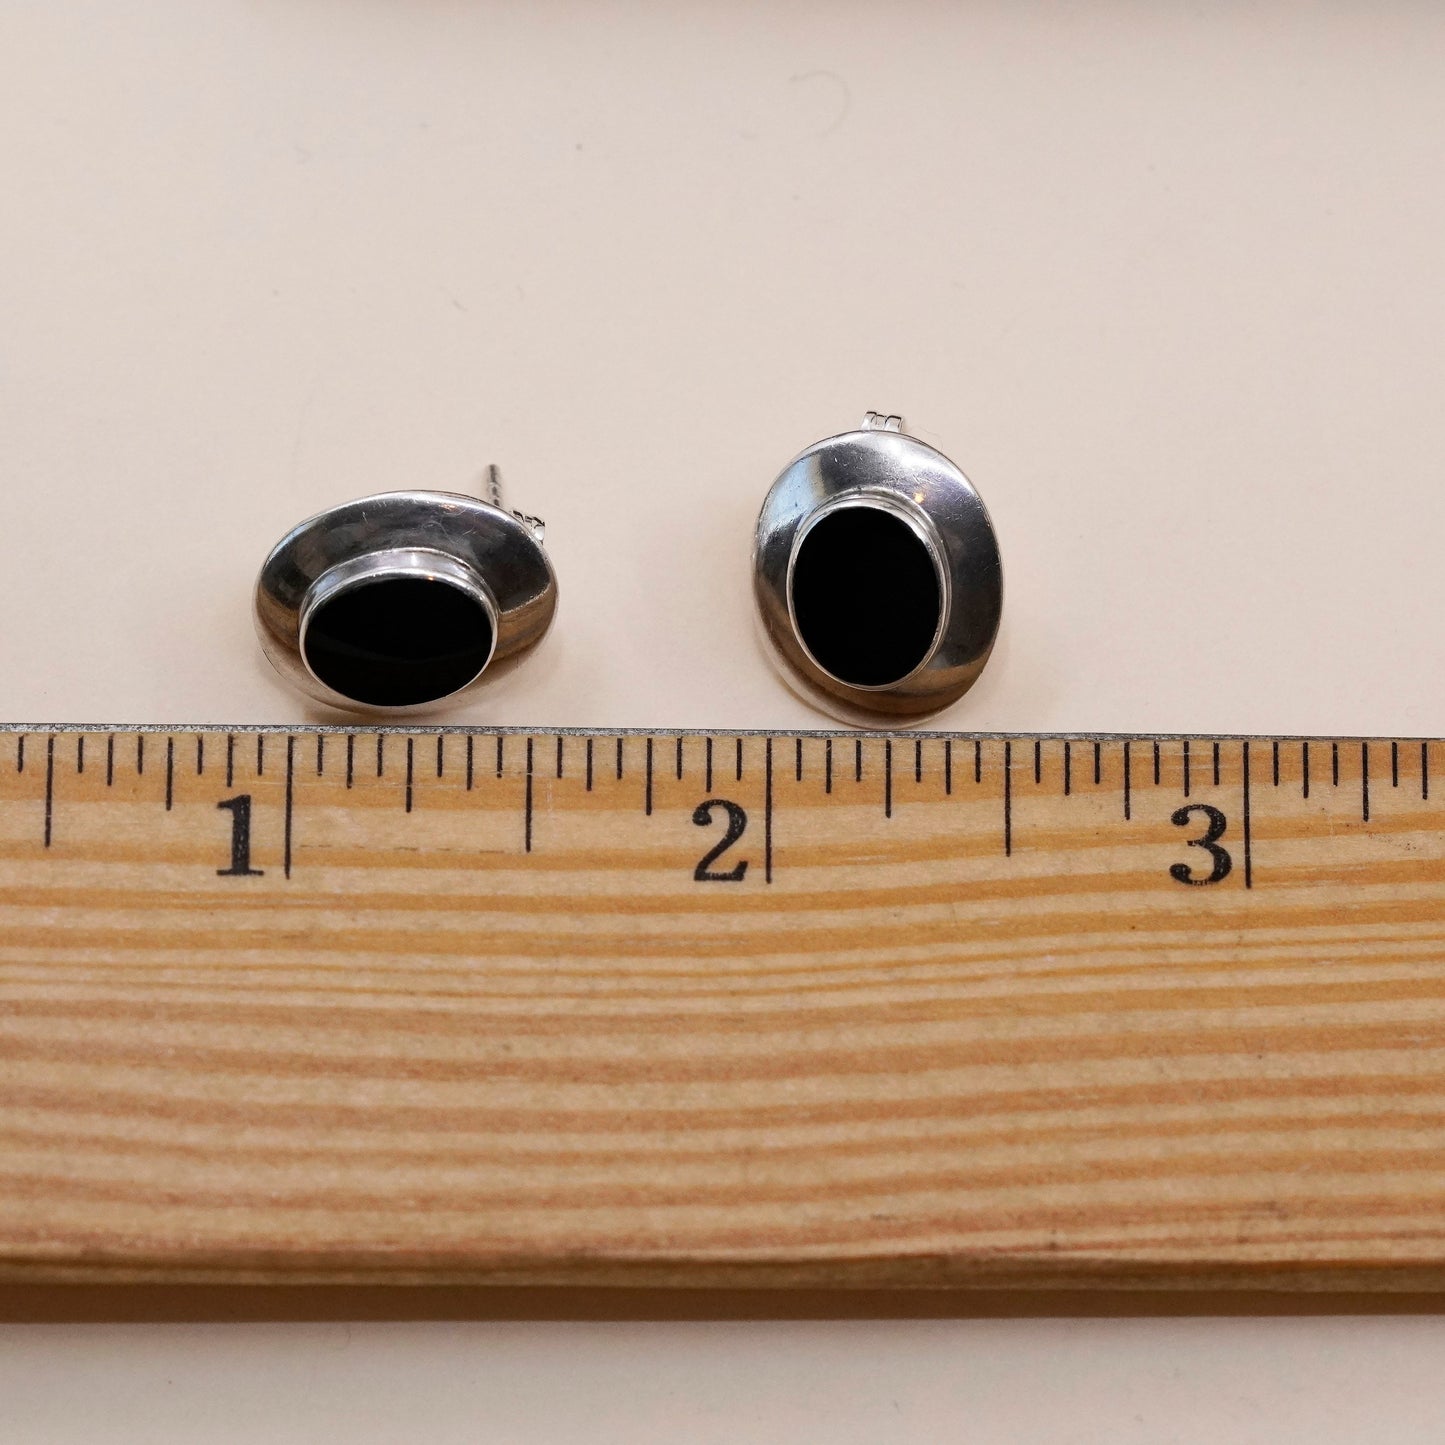 Vintage Sterling silver handmade earrings, Mexico 925 oval studs with onyx